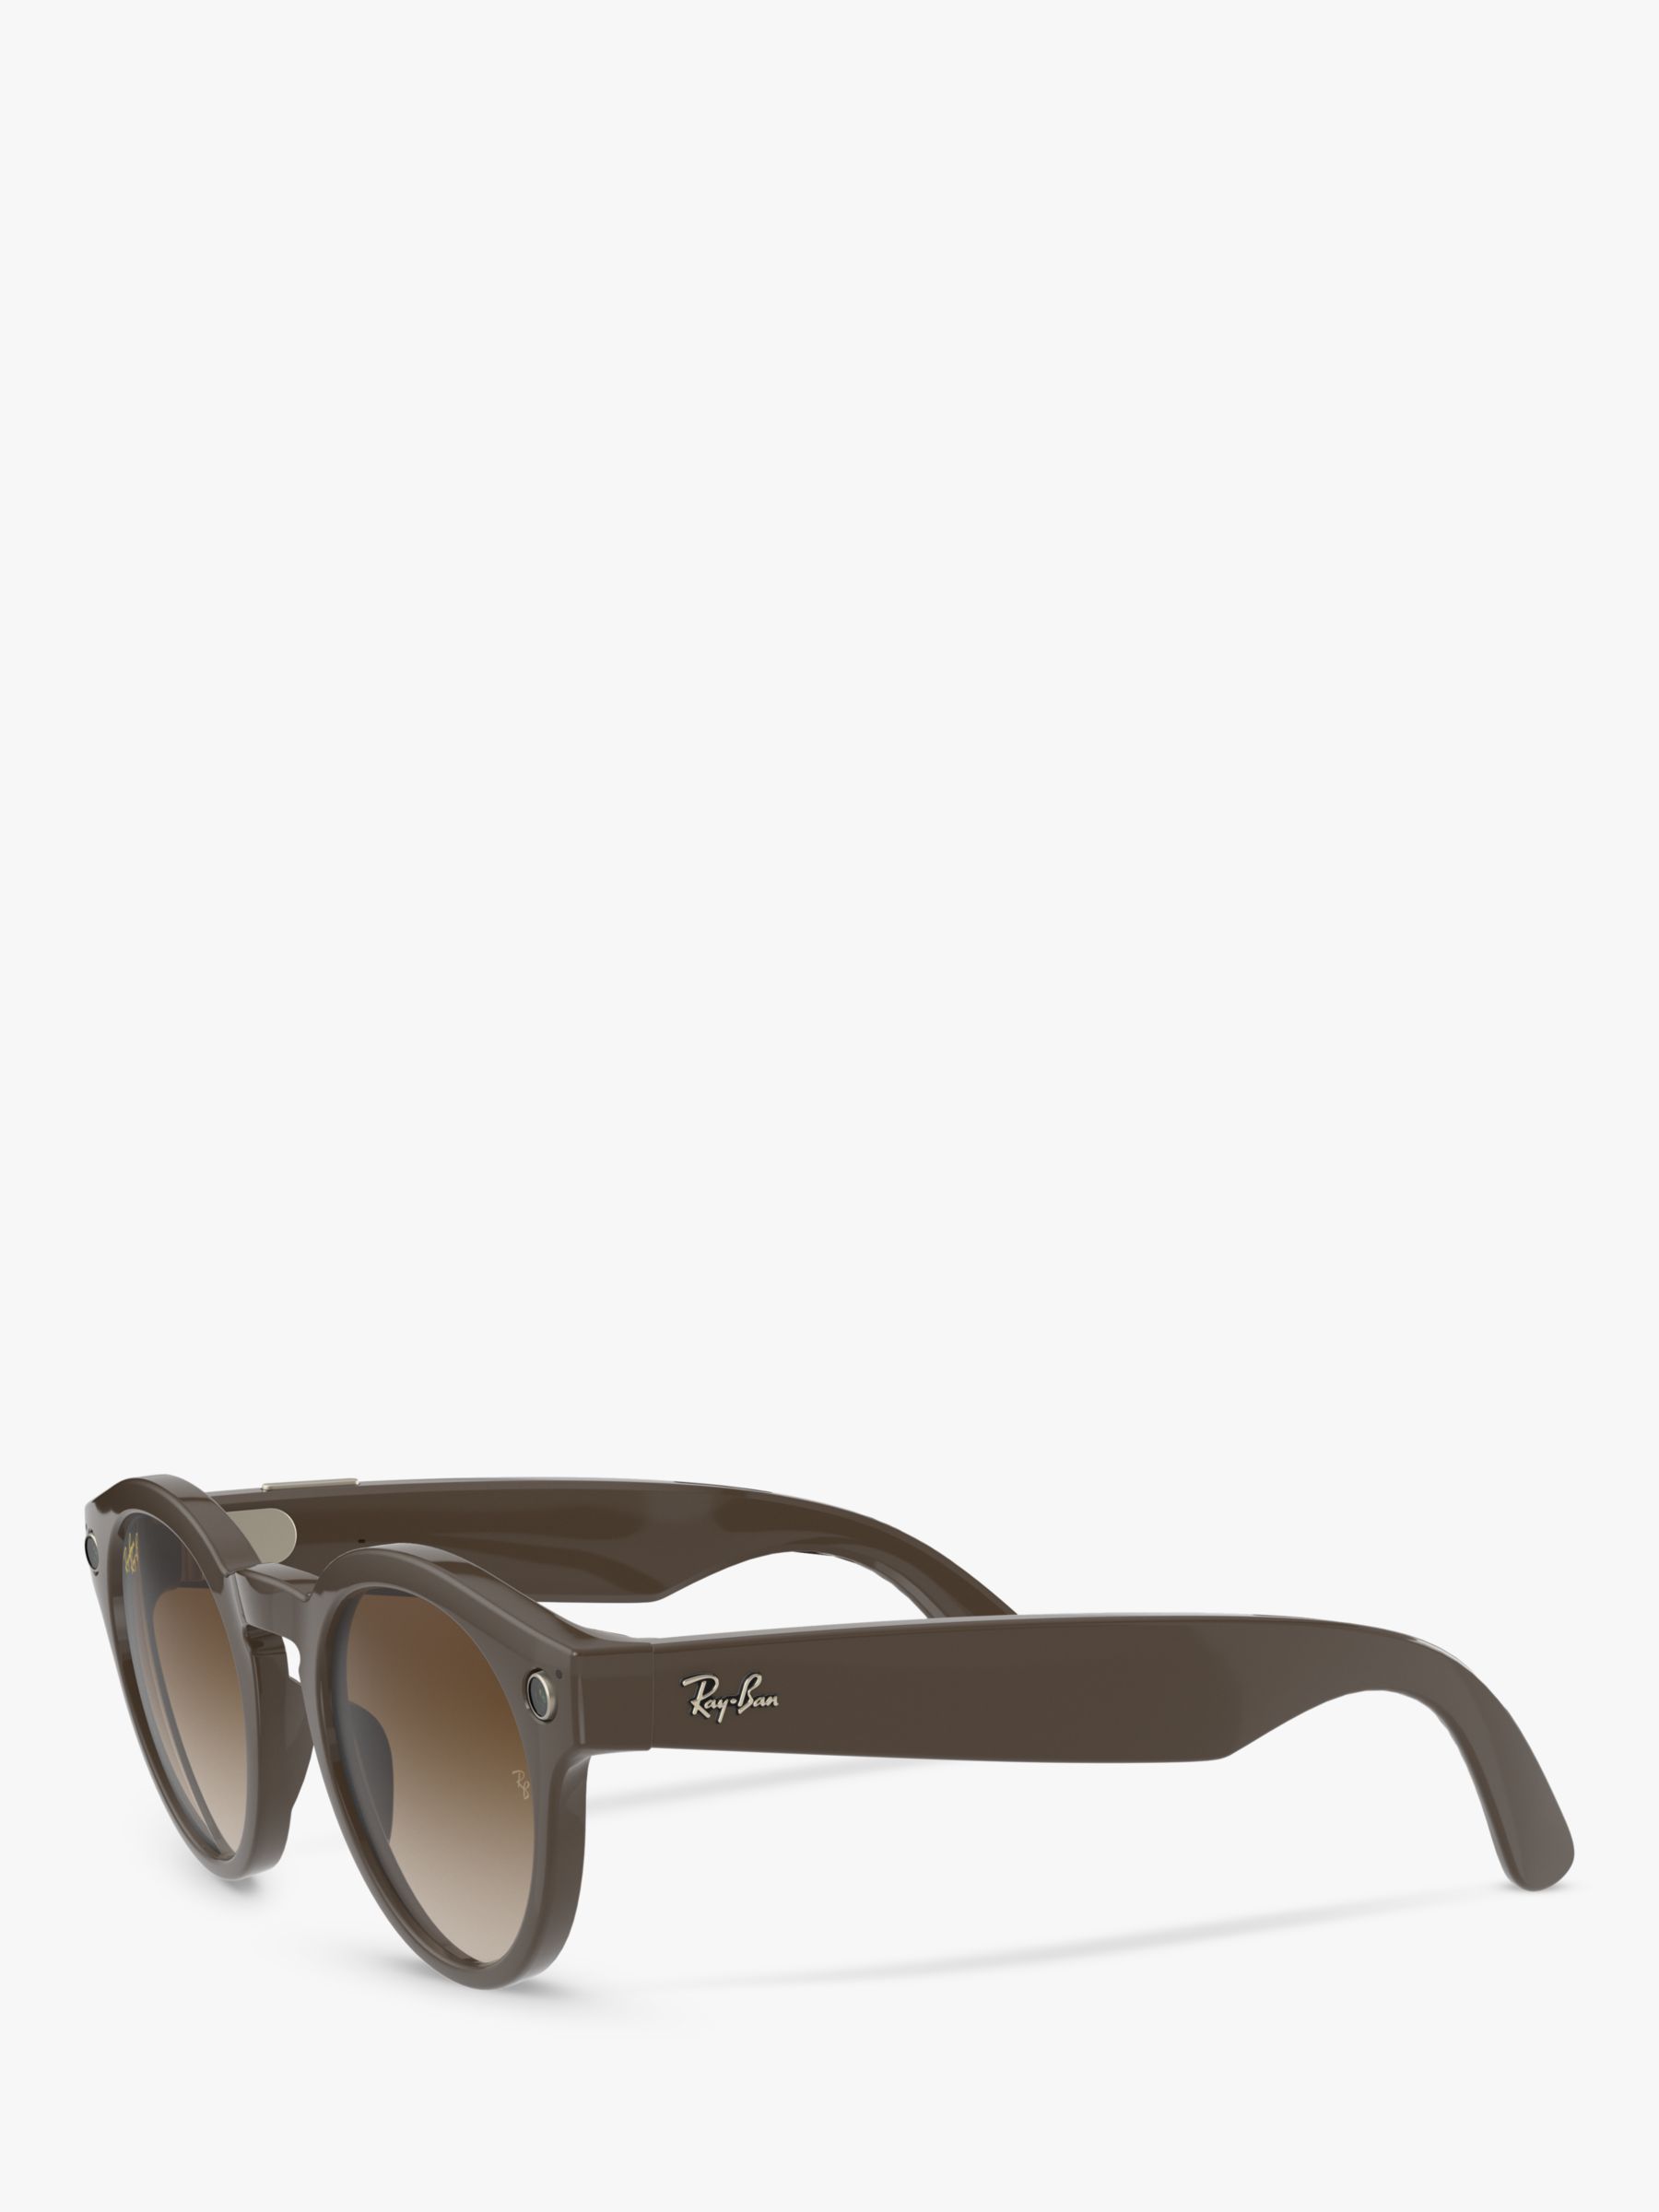 Ray-Ban Stories Round Smart Sunglasses, Shiny Brown/Gradient Brown at John  Lewis & Partners